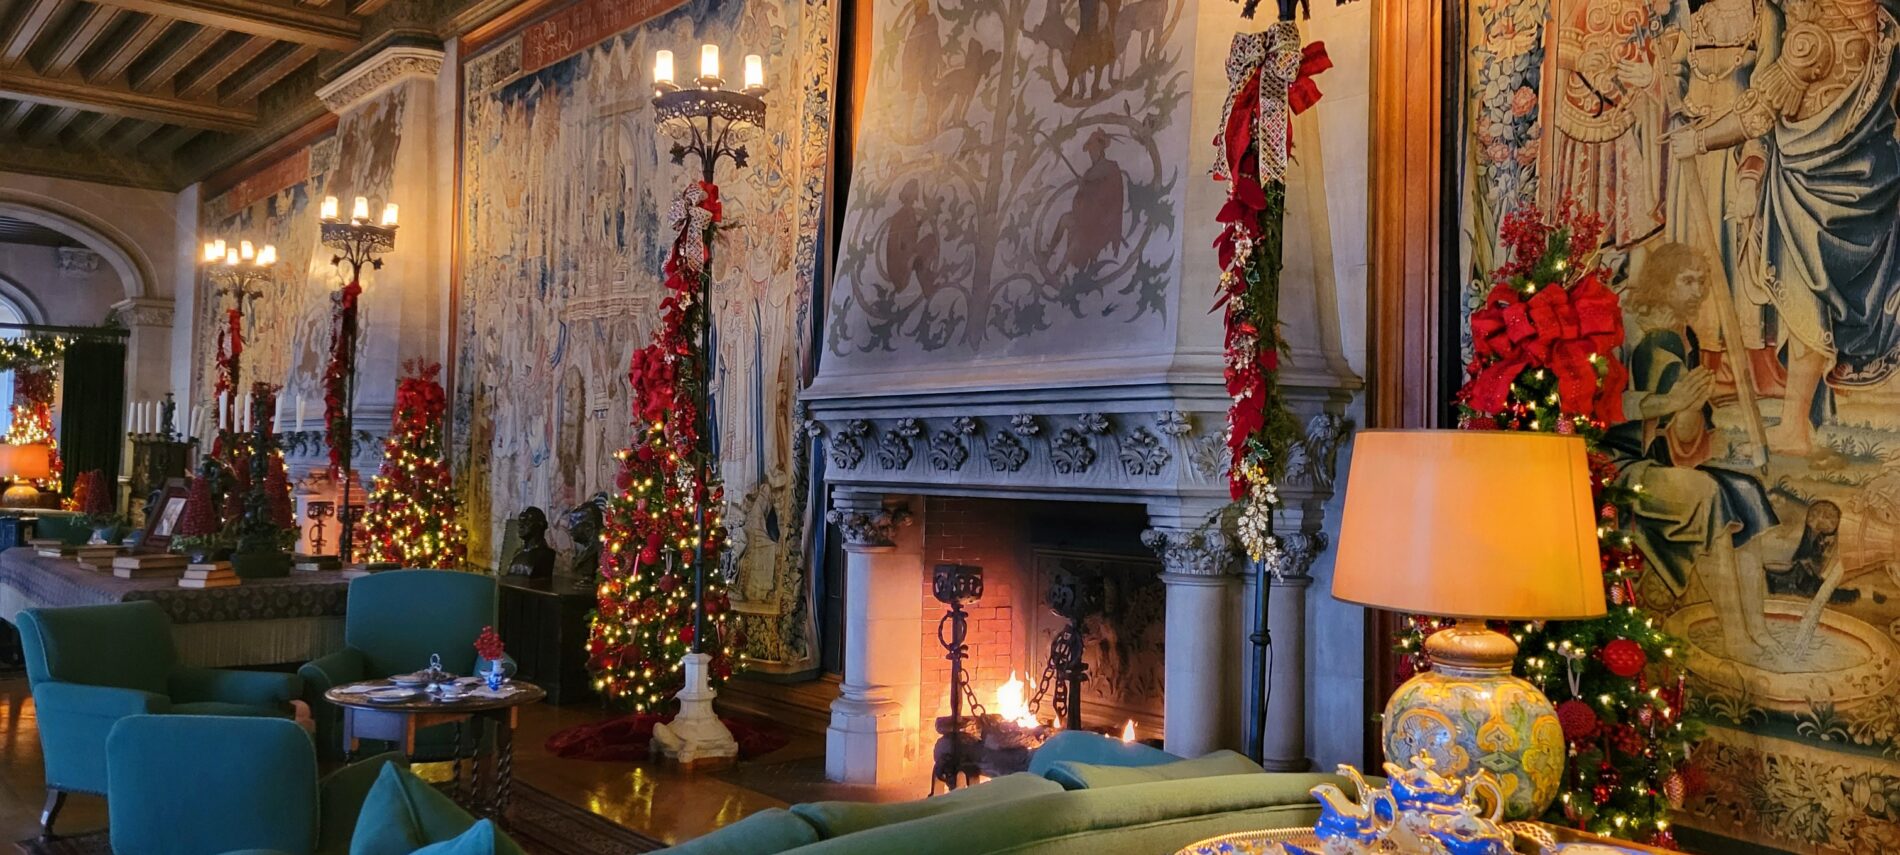 Biltmore House Tapestry Gallery decorated for Christmas with fireplaces lit